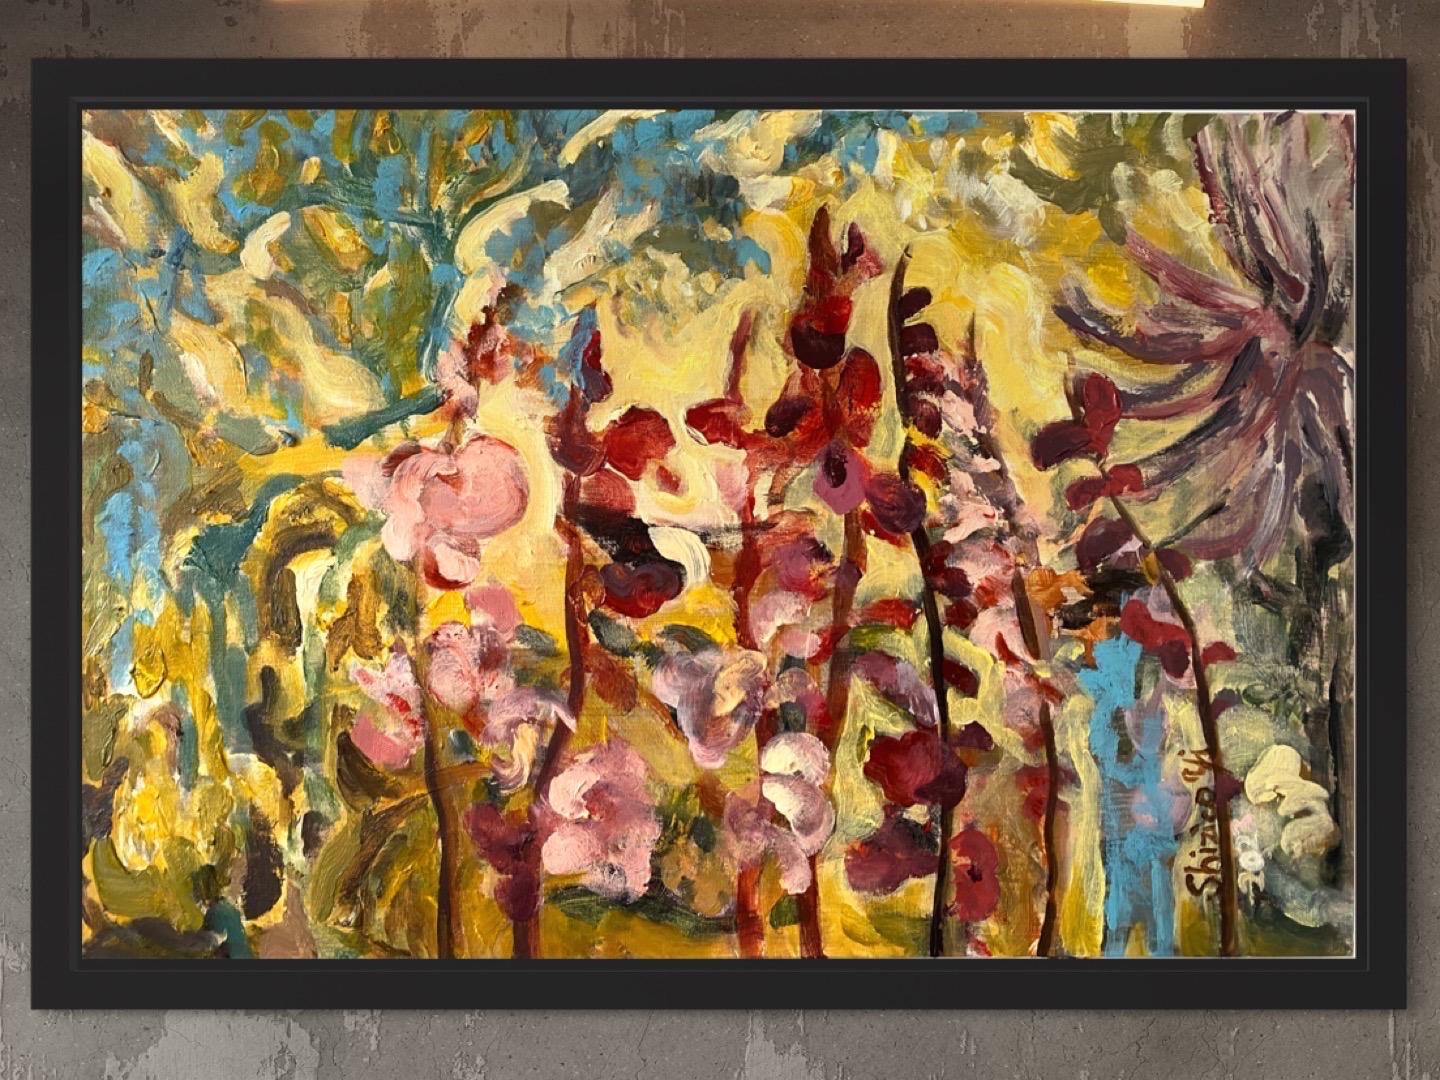 X-Large#1 Limited-Gladiolus Glorious-Hand Painted finishing-Award British Artist - Abstract Expressionist Painting by Shizico Yi